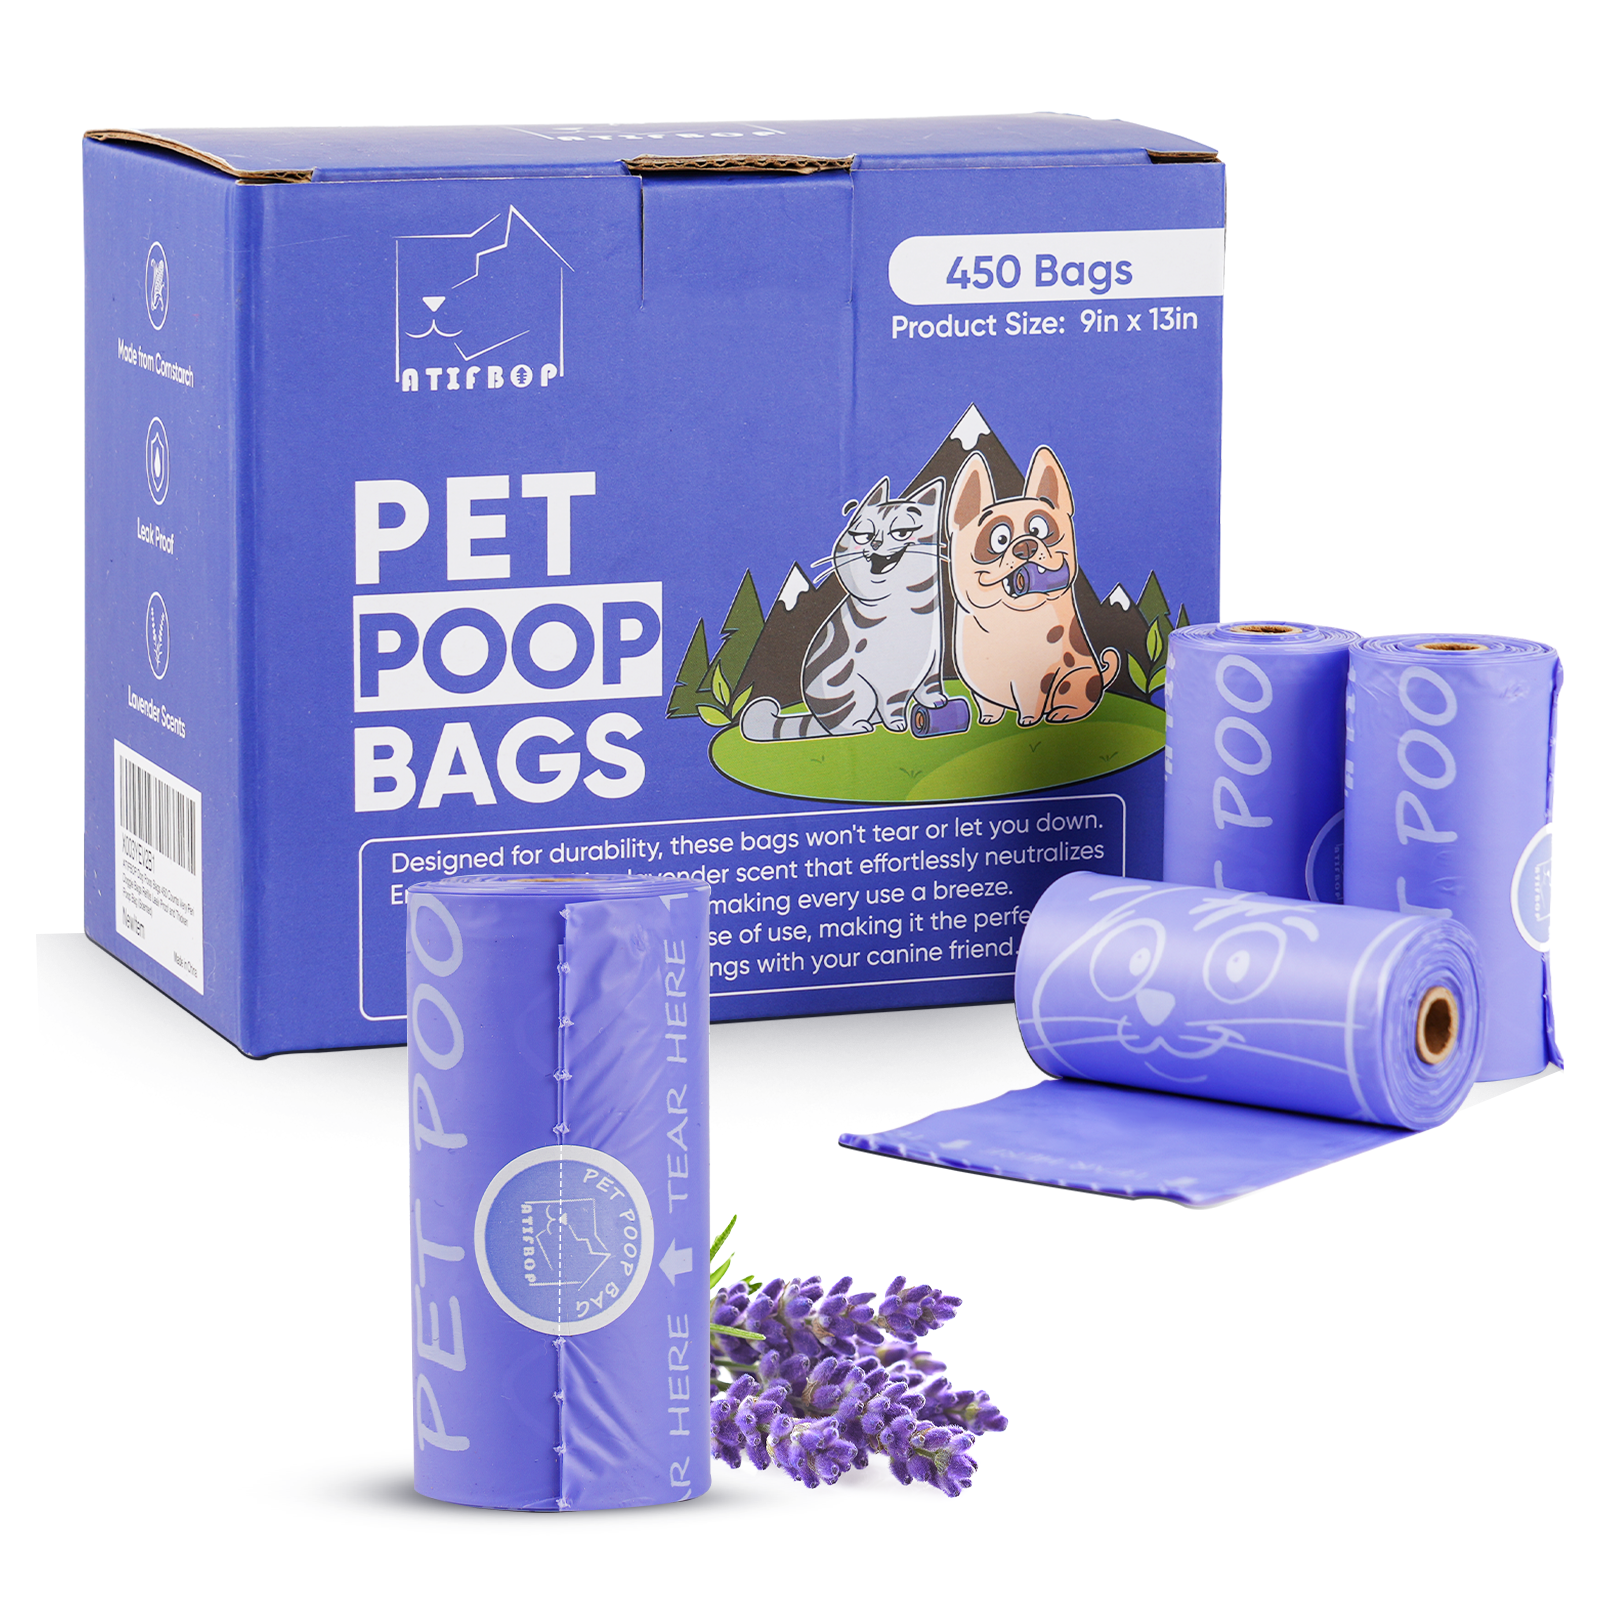 ATIFBOP Pet Poop Bags Lavender Scented, Made from cornstarch